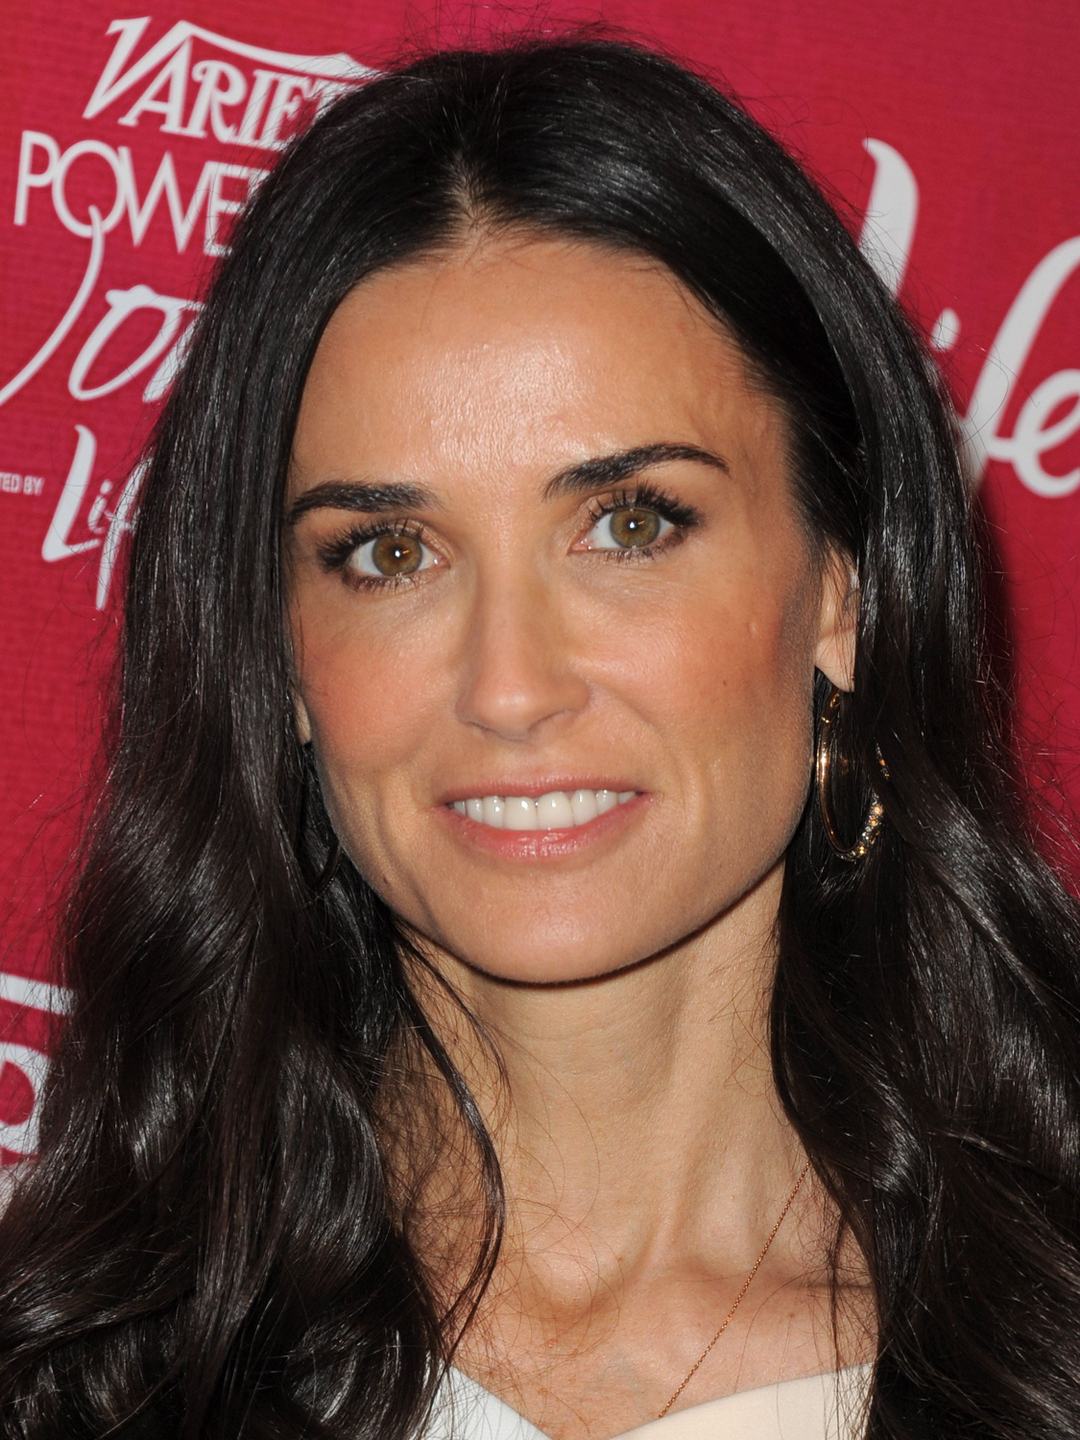 Demi Moore who is she